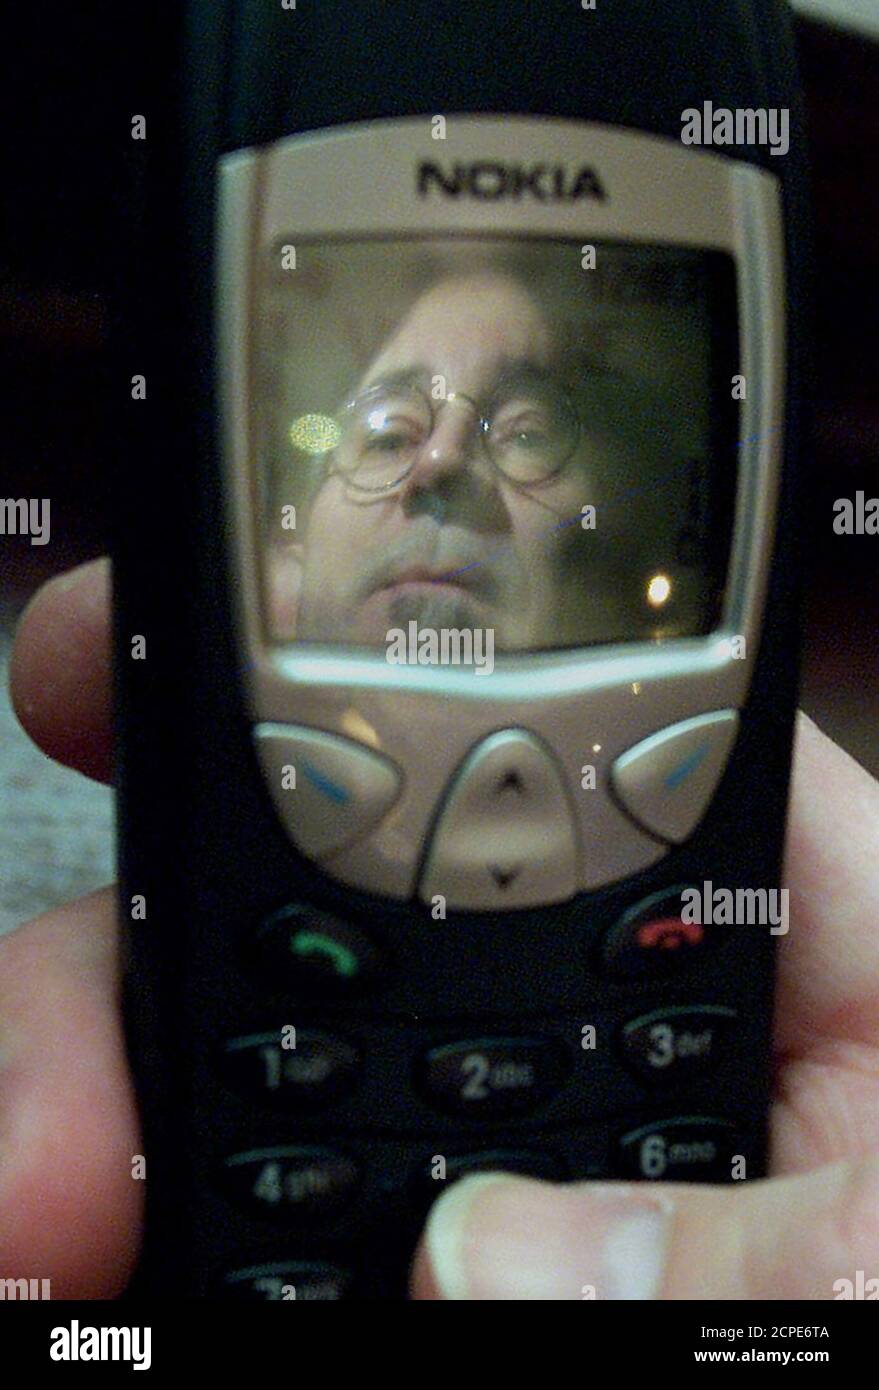 Mobile phone user, Australian Daniel Davis, is reflected on the screen of his handset in central London, January 25, 2002. Britain launched a 7.4 million pound ($10.5 million) research programme on Friday to investigate whether mobile phones pose a health risk. REUTERS/Ferran Paredes  FP/ASA Stock Photo